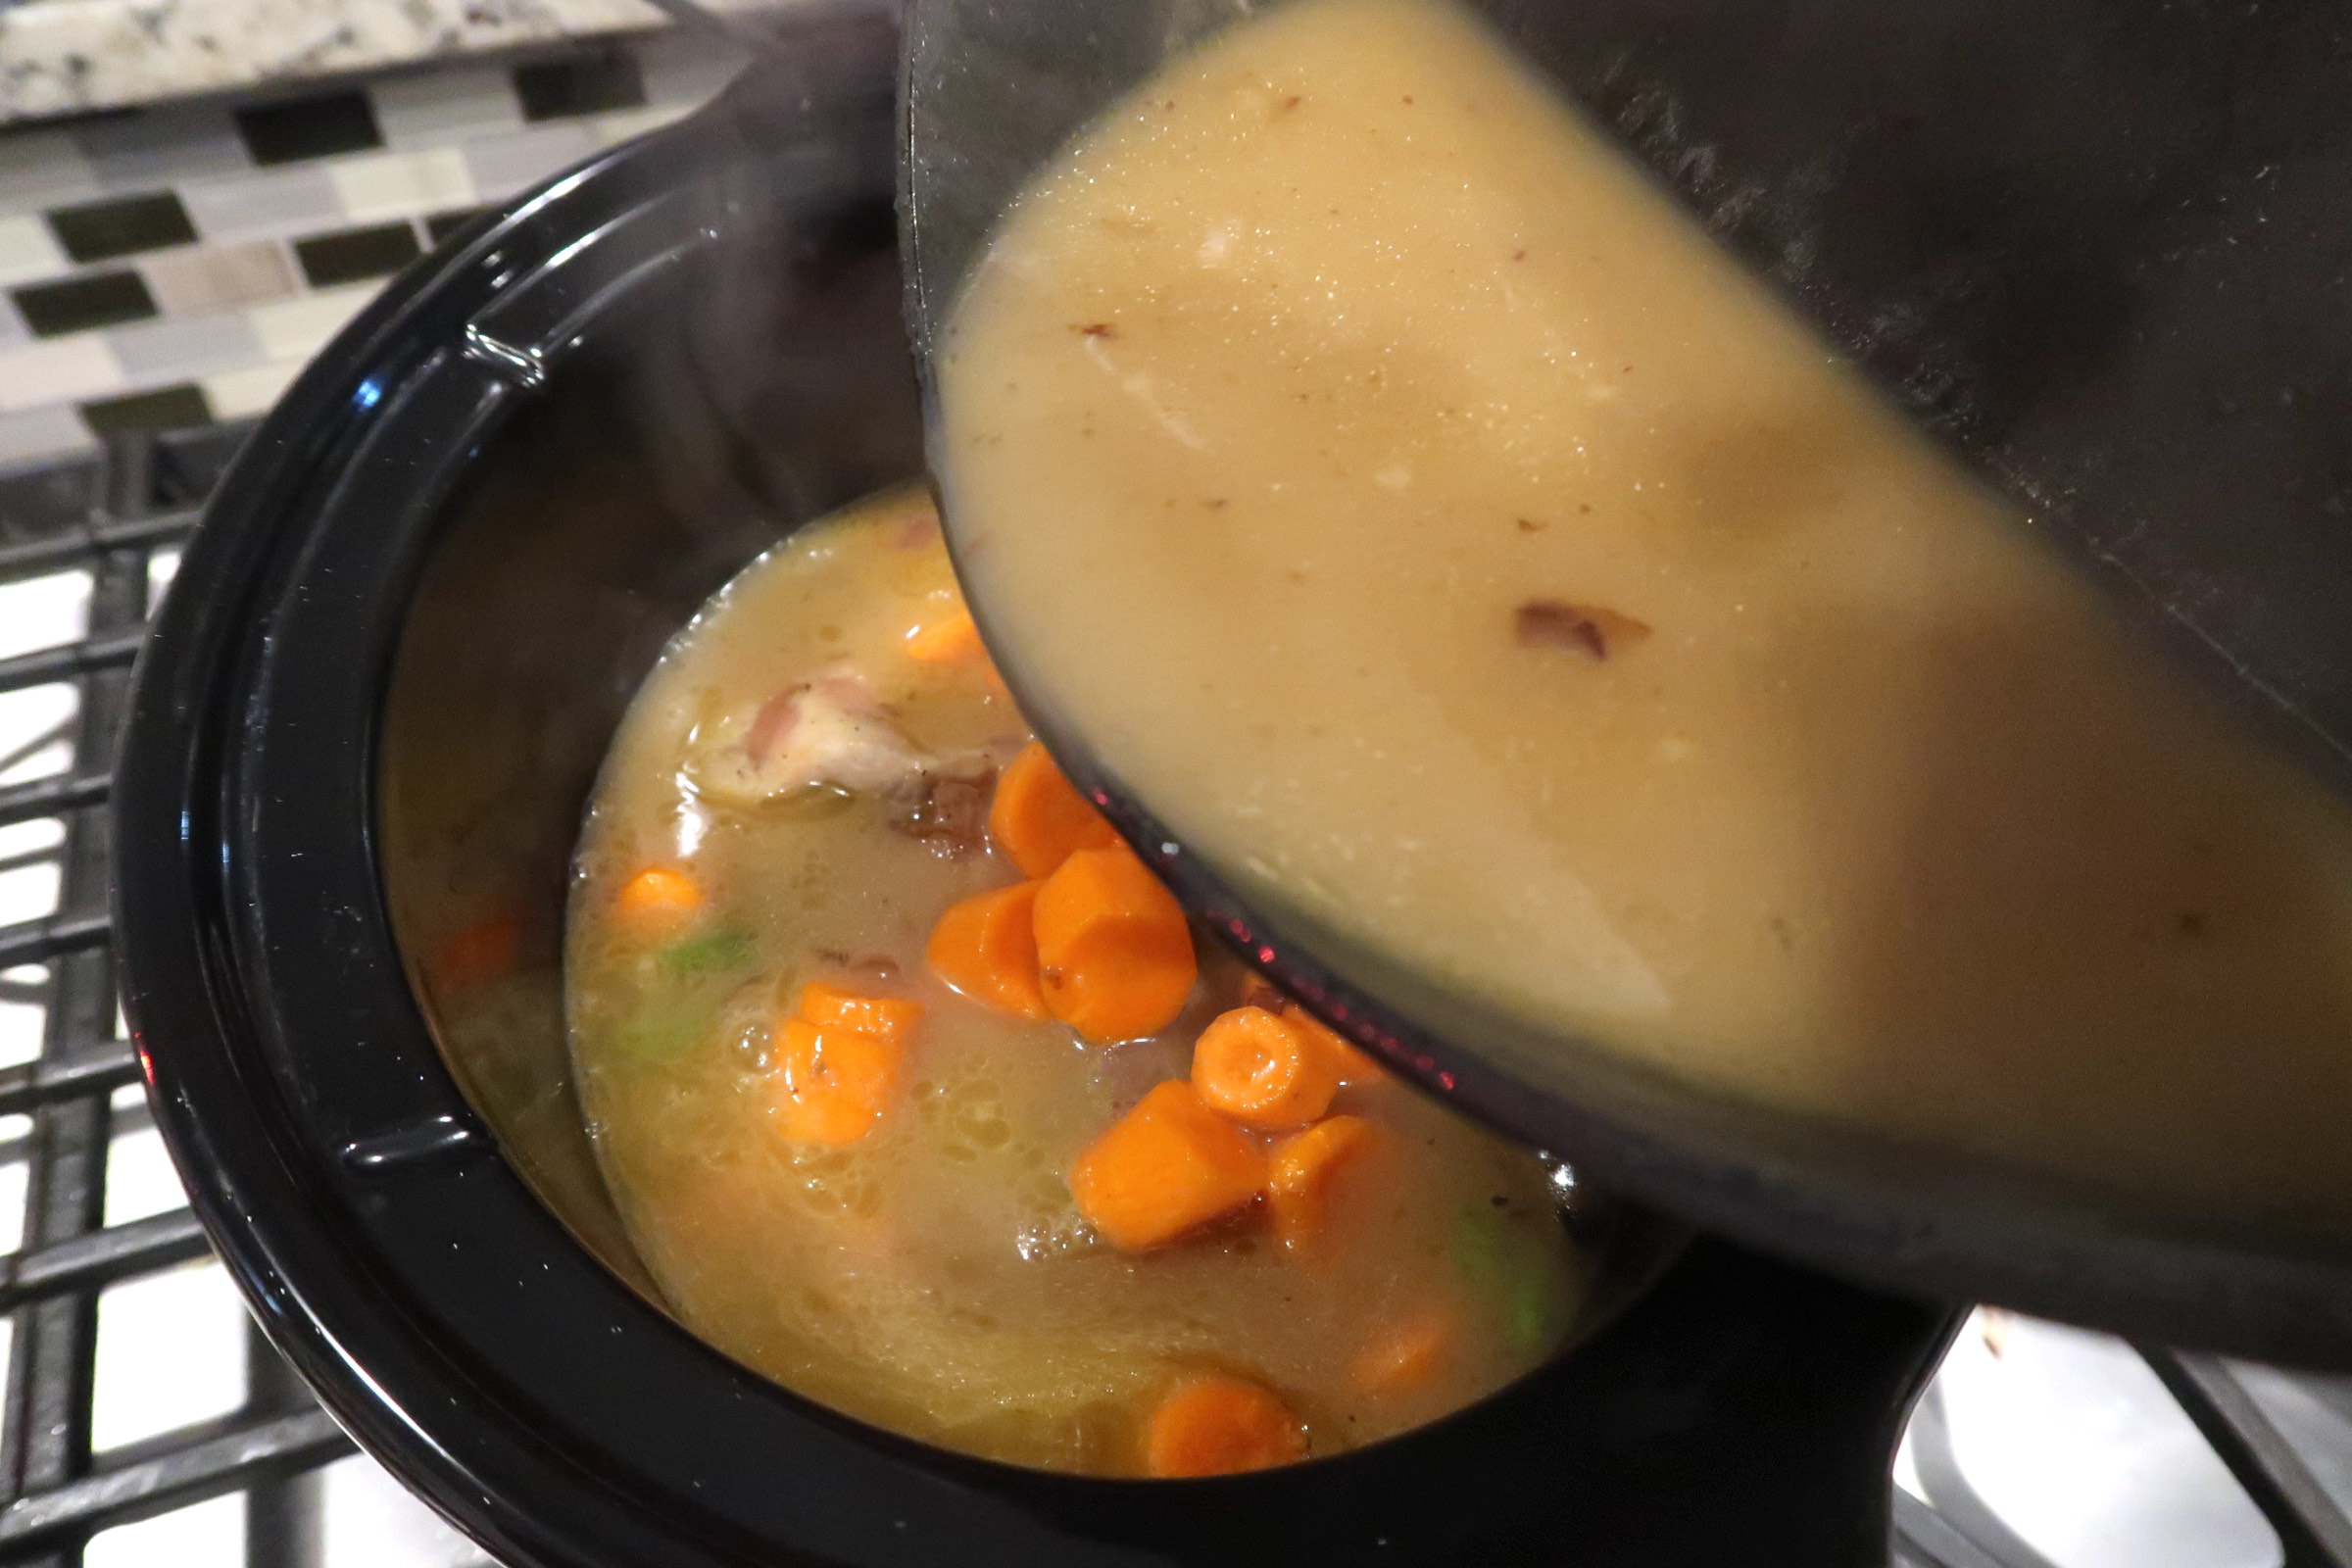 Pouring golden homemade chicken stock over the ingredients of homemade chicken stew.